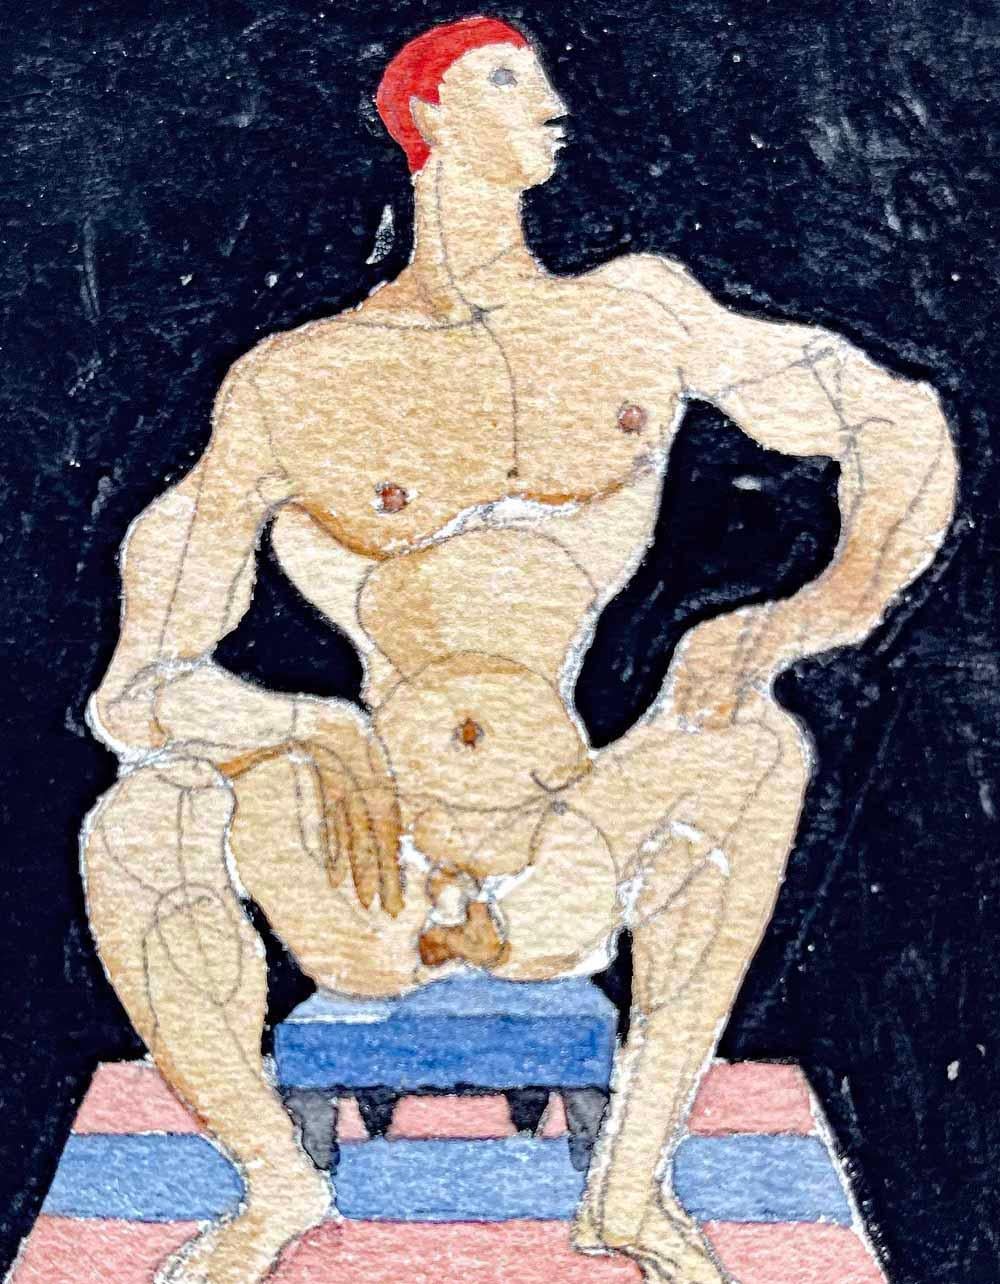 Broad-shouldered and red-haired, the male nude figure depicted here is full of confidence and attitude.  The figure sits on a stool, his feet planted on a striped rug in pink and lavender, the entire scene enveloped in black.  The painter, Raoul